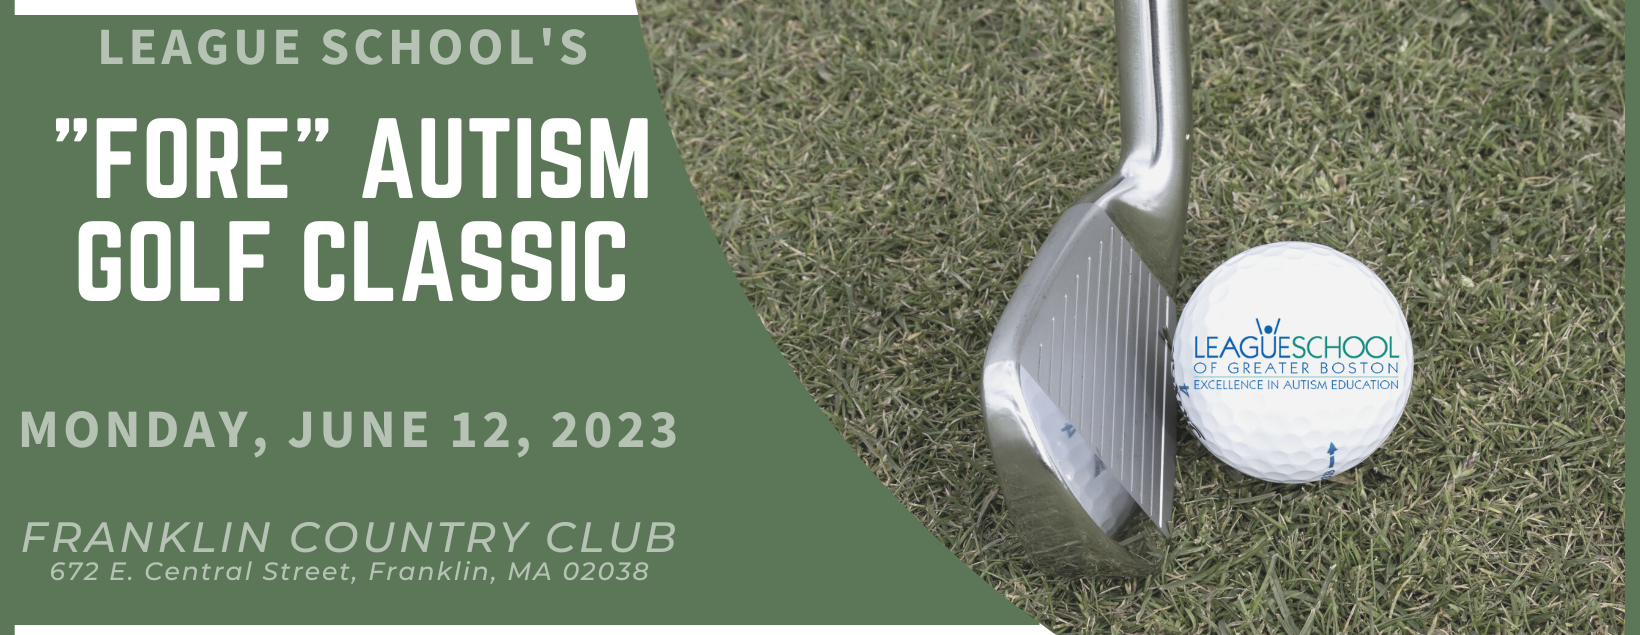 2023 "Fore" Autism Golf Classic